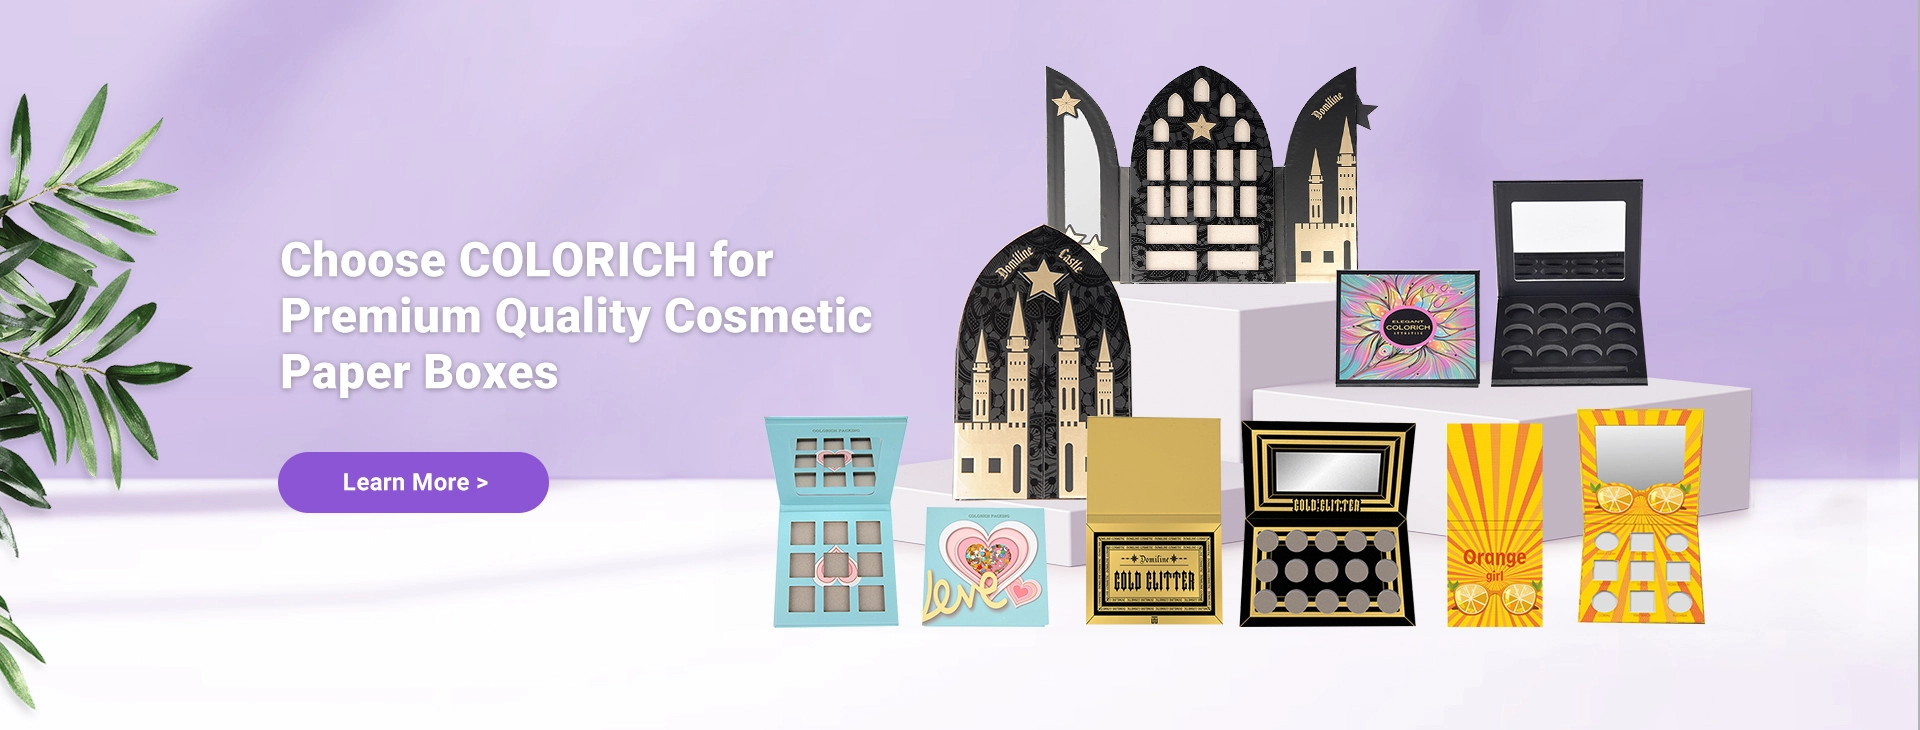 Choose COLORICH for Premium Quality Cosmetic Paper Boxes